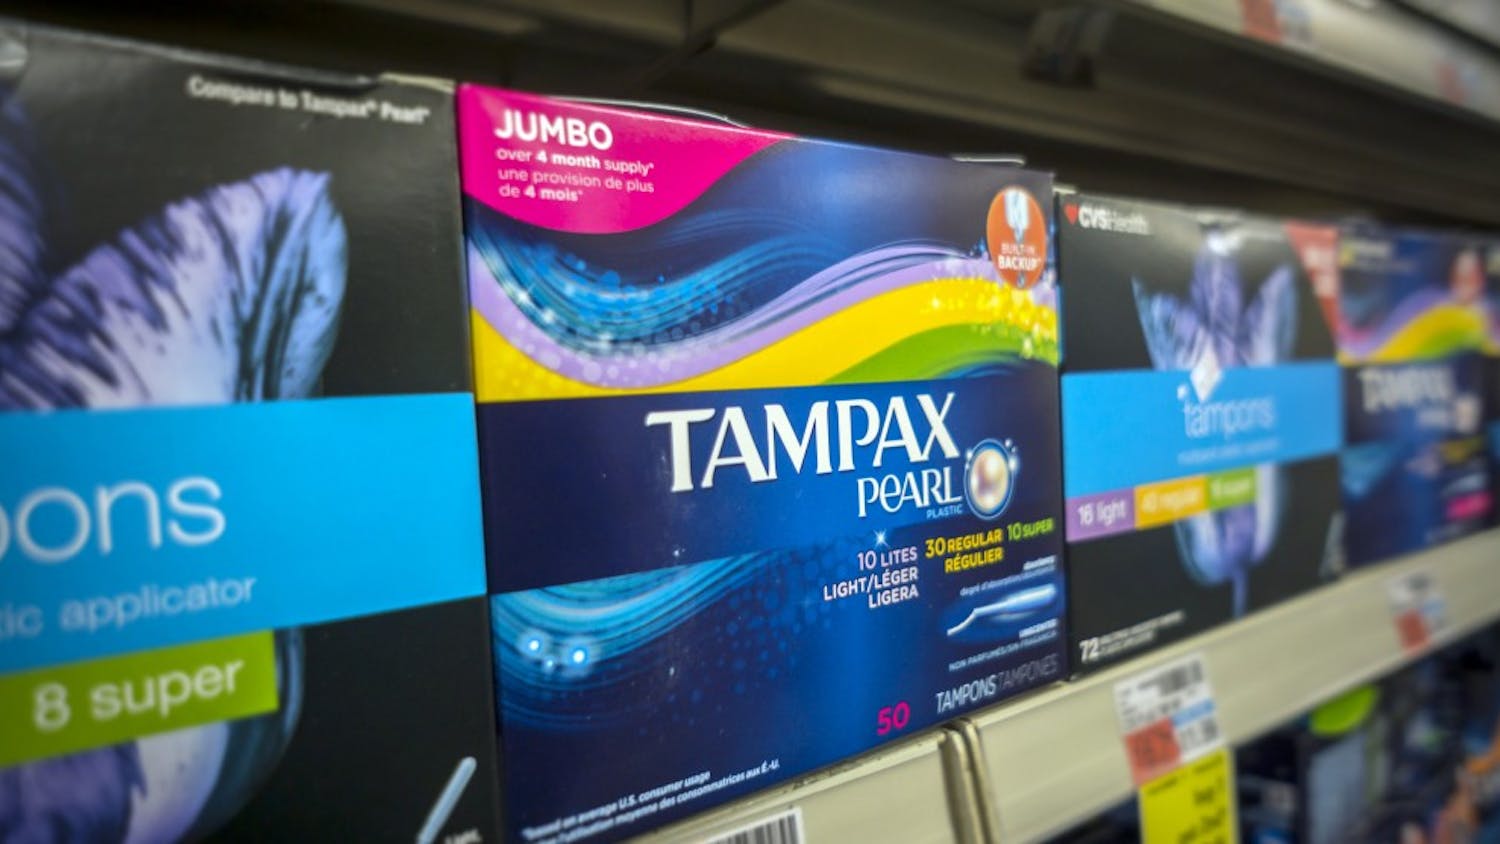 Boxes of tampons are displayed in a pharmacy in New York. A group of women has filed a lawsuit accusing the state of unlawfully taxing feminine hygiene products, arguing that medical items are exempt from sales tax. (Richard B. Levine/Newscom/Zuma Press/TNS) 